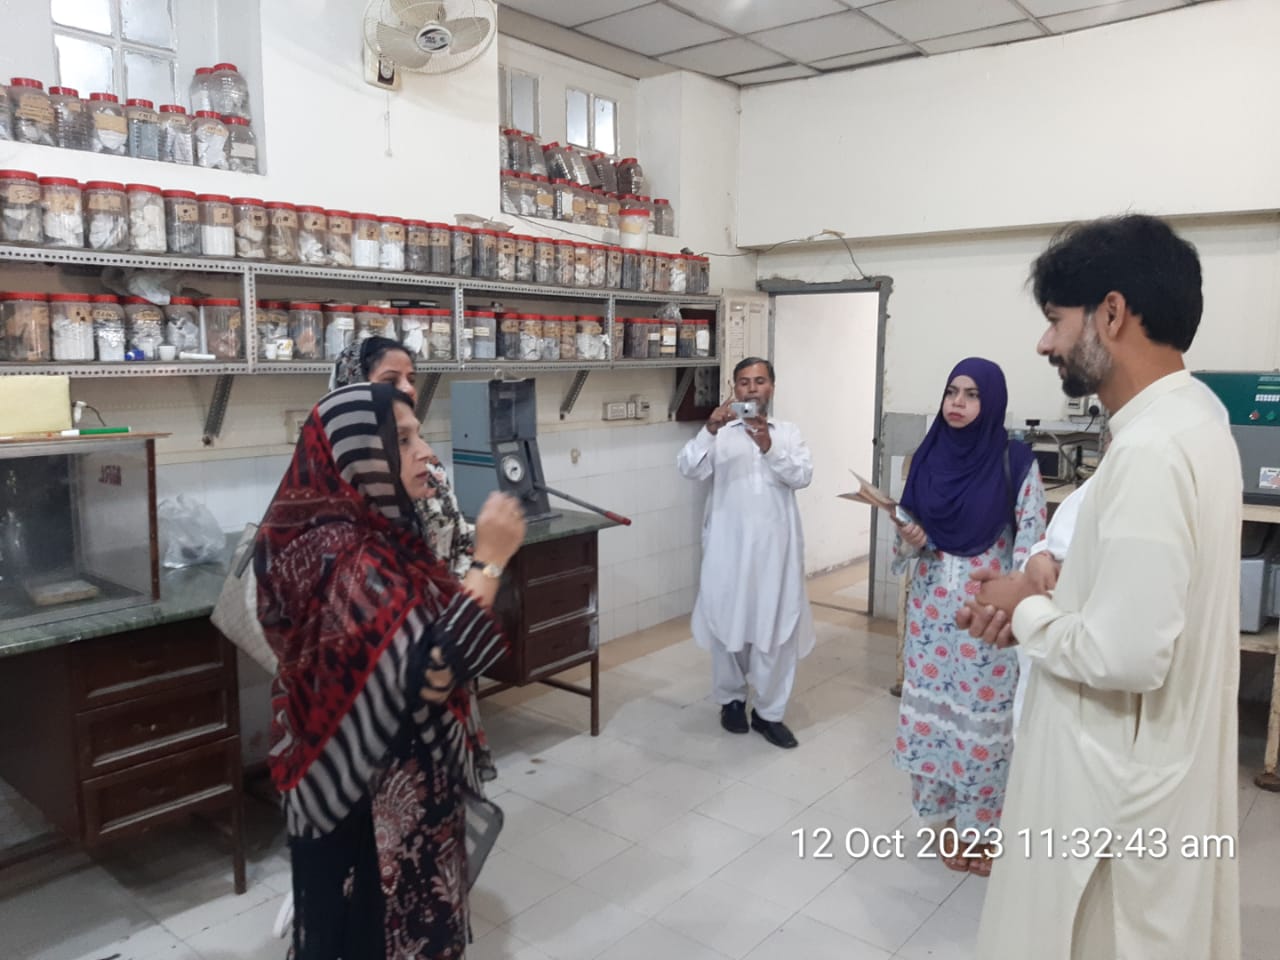 Chairperson M. Ali Sb. in materials Lab. with visiting members